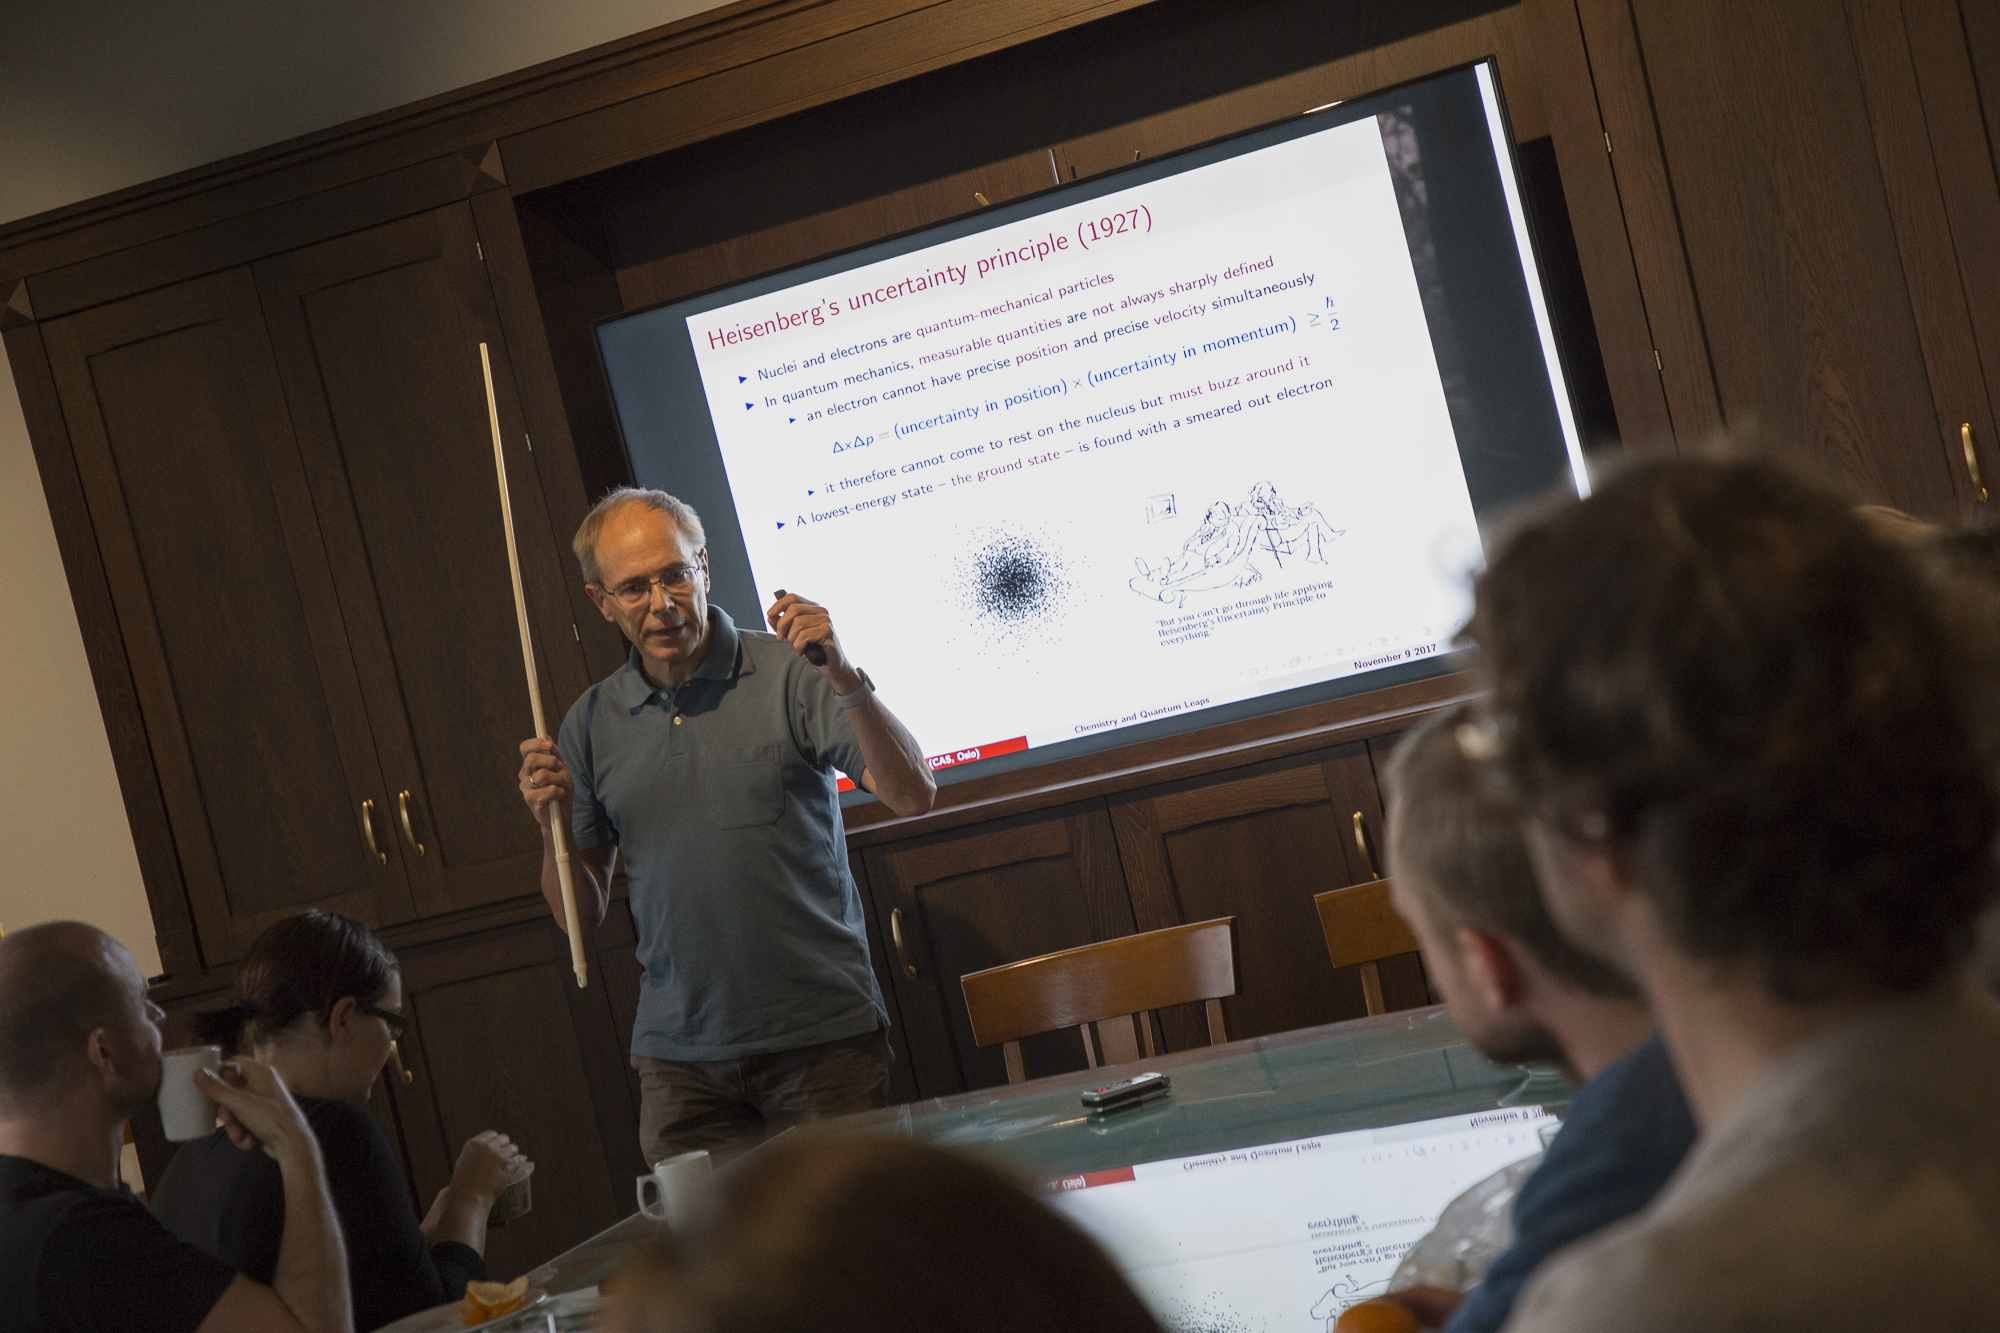 Trygve Helgaker giving a lecture during a lunch seminar at CAS in 2017-2018. Photo: Camilla K. Elmar / CAS